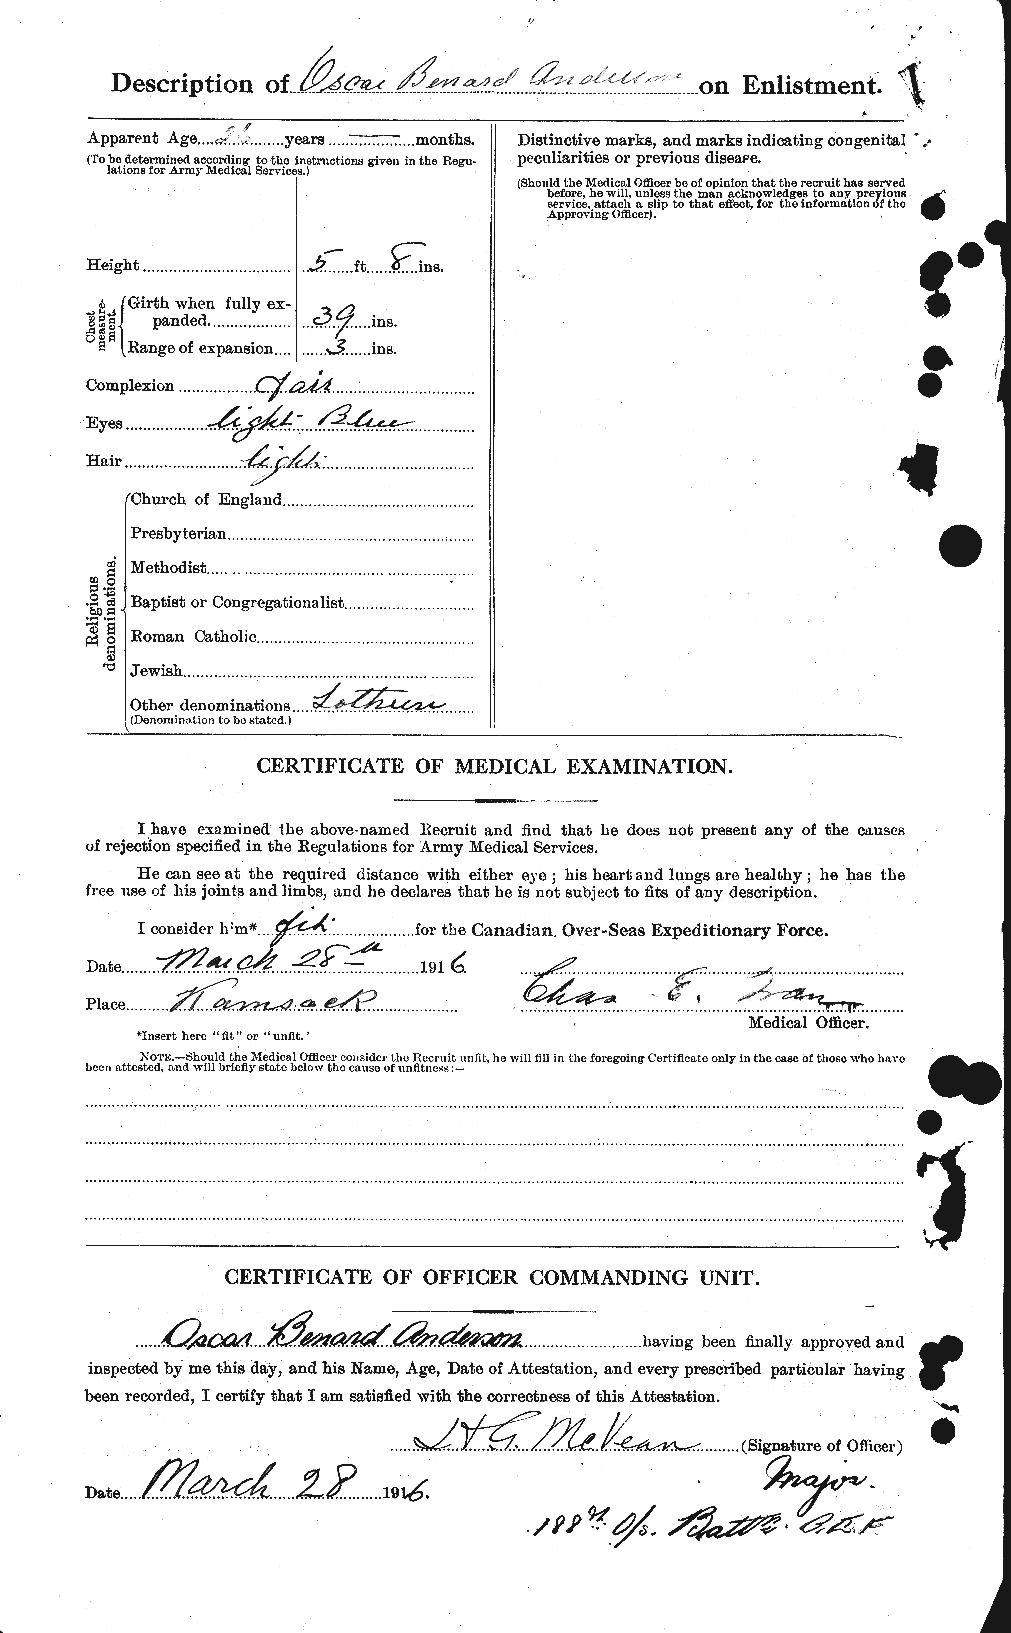 Personnel Records of the First World War - CEF 207381b